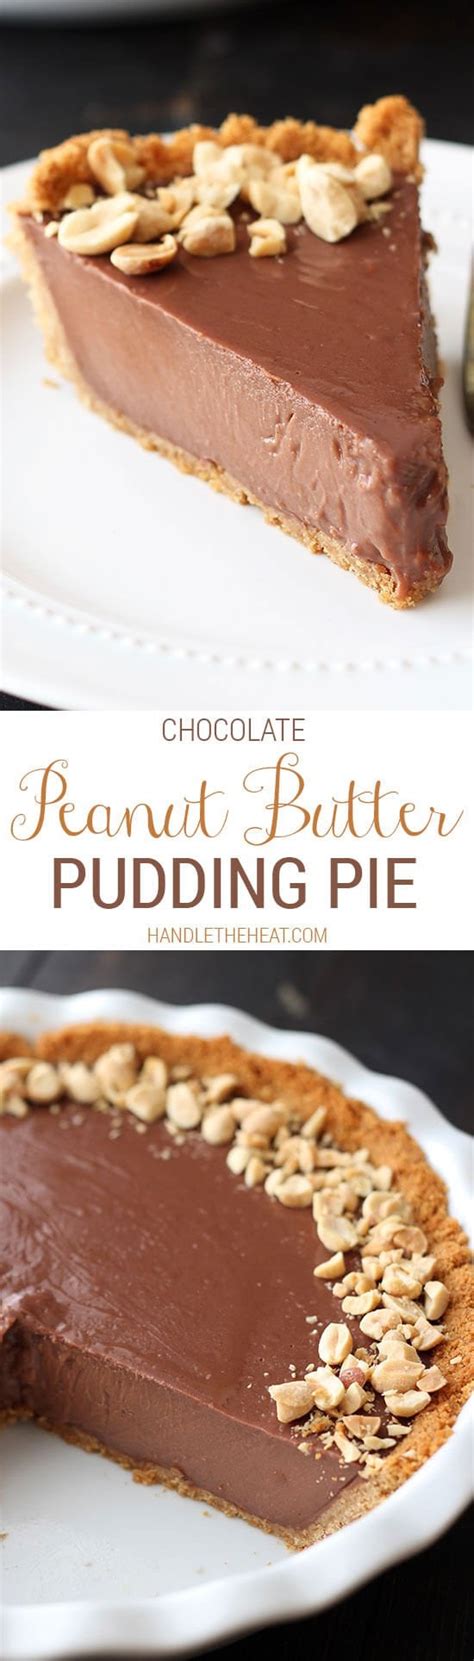 Continue beating on low speed for about 1 minute. Chocolate Peanut Butter Pudding Pie - Handle the Heat